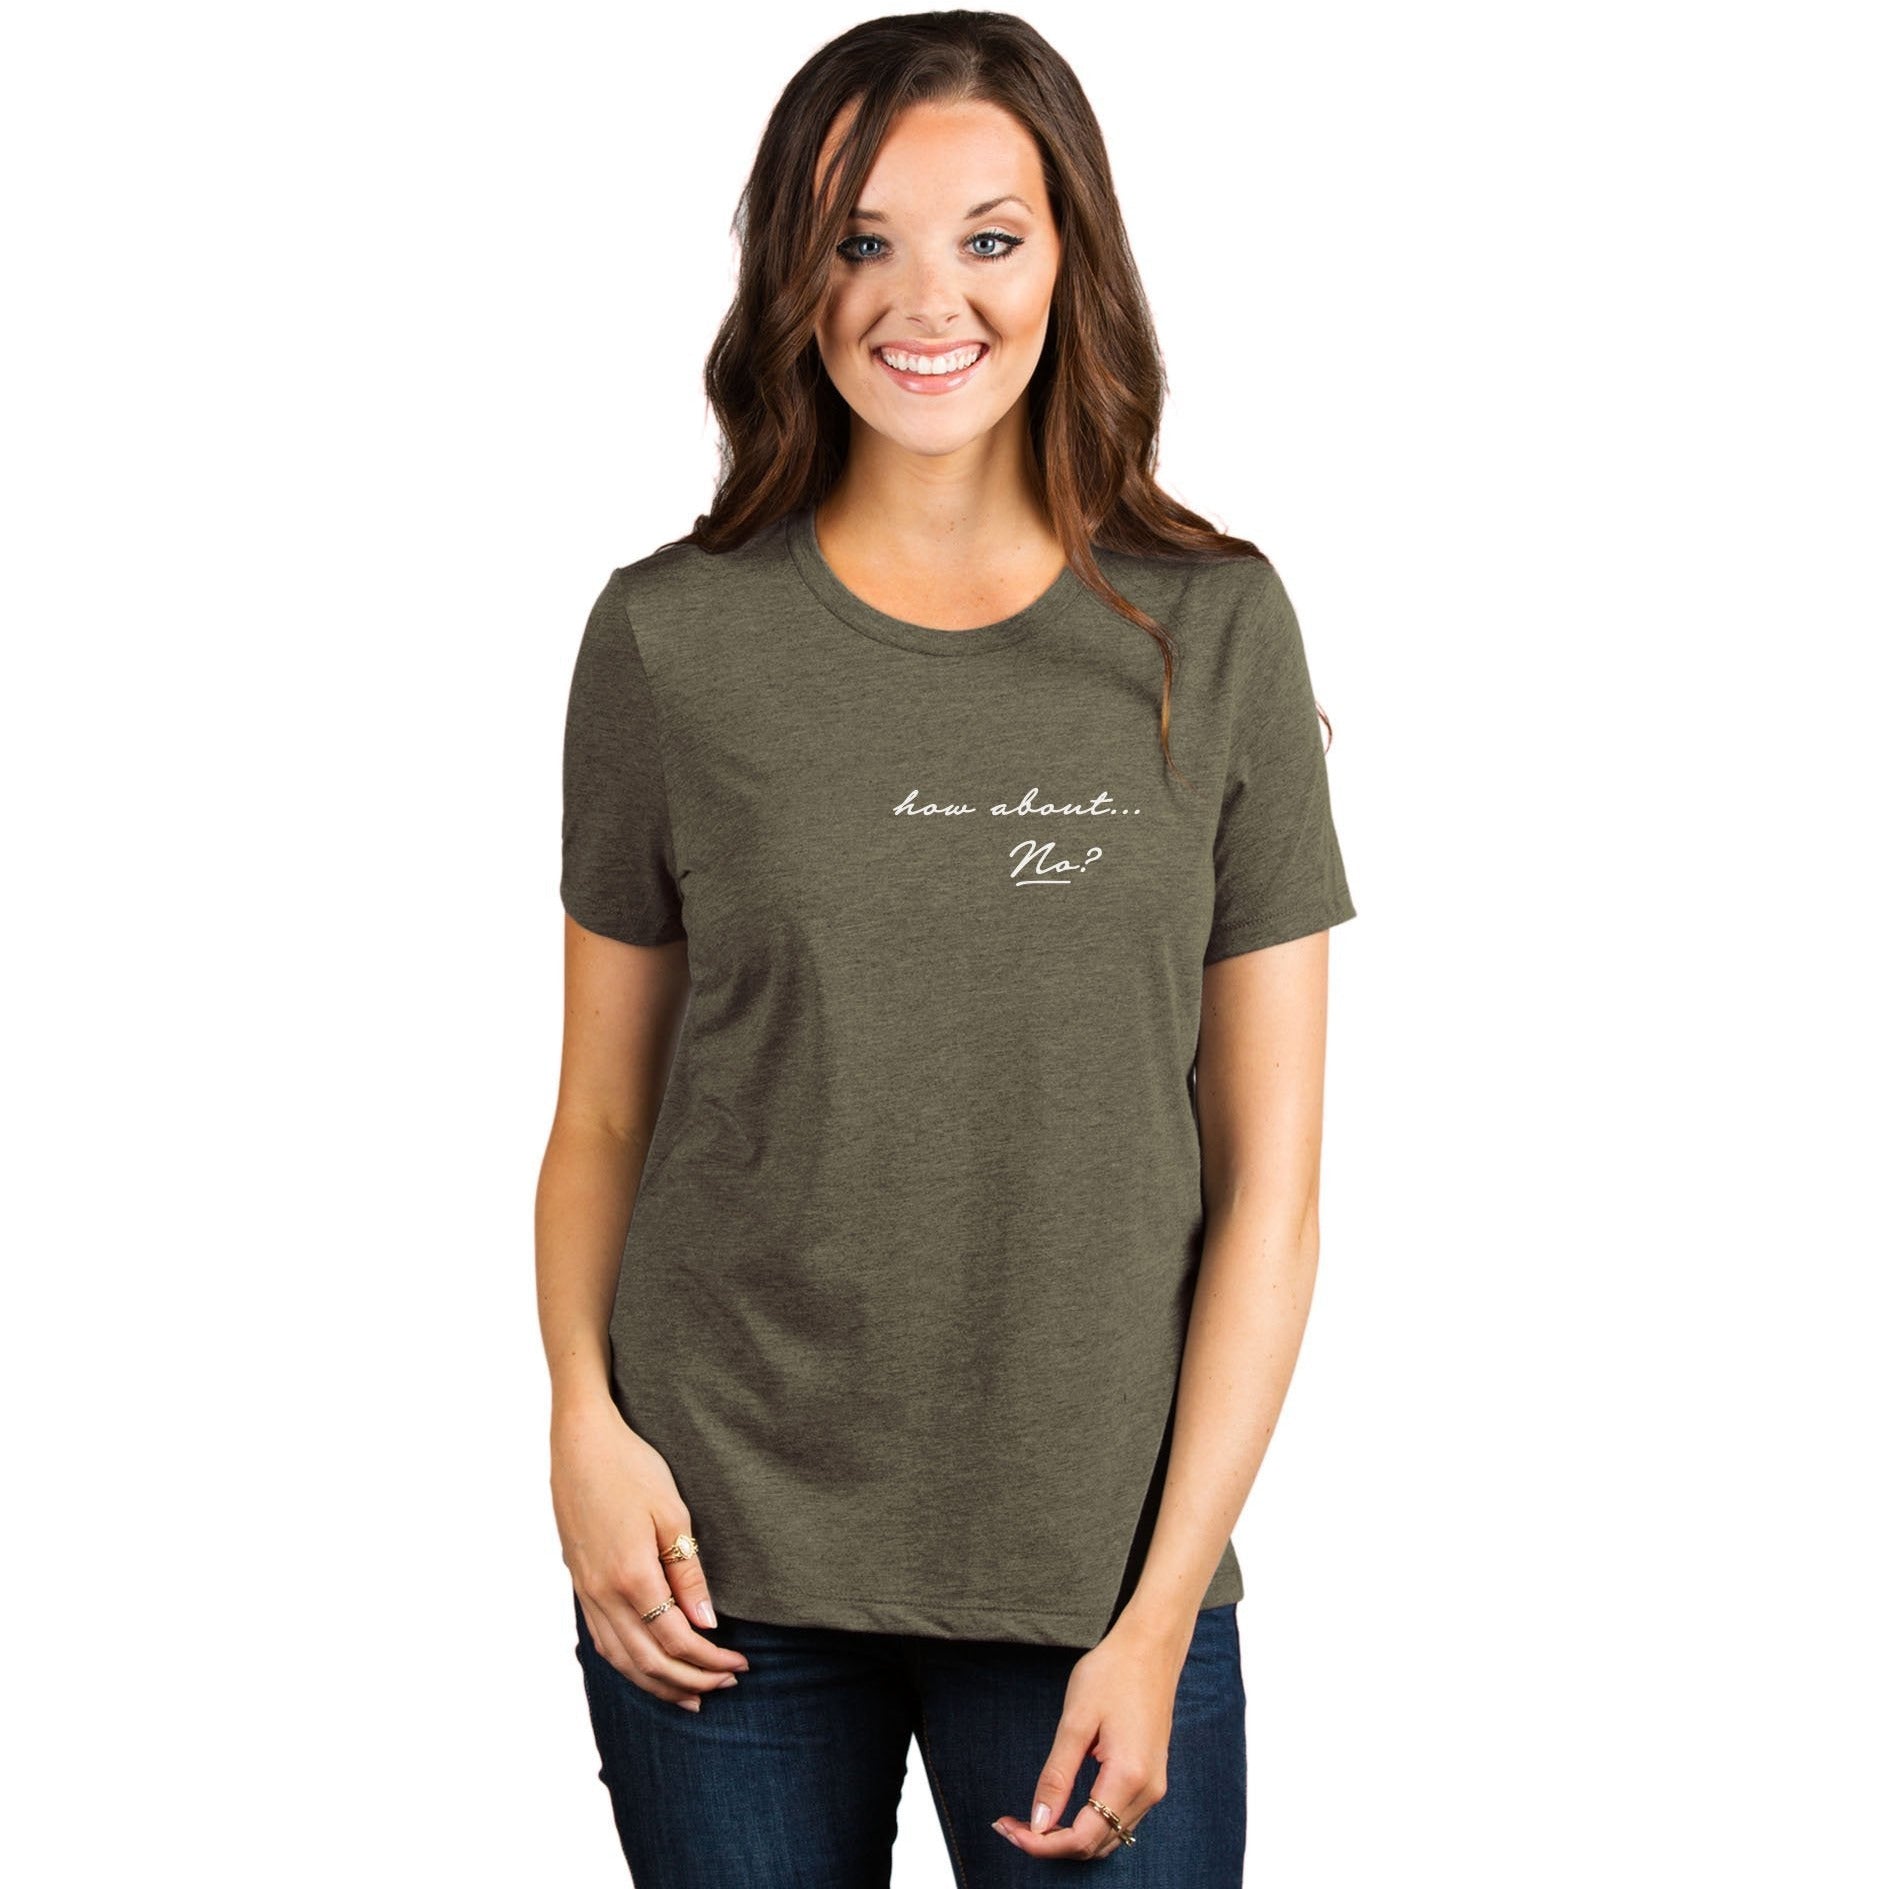 How About No Women's Relaxed Crewneck T-Shirt Top Tee Heather Sage Model